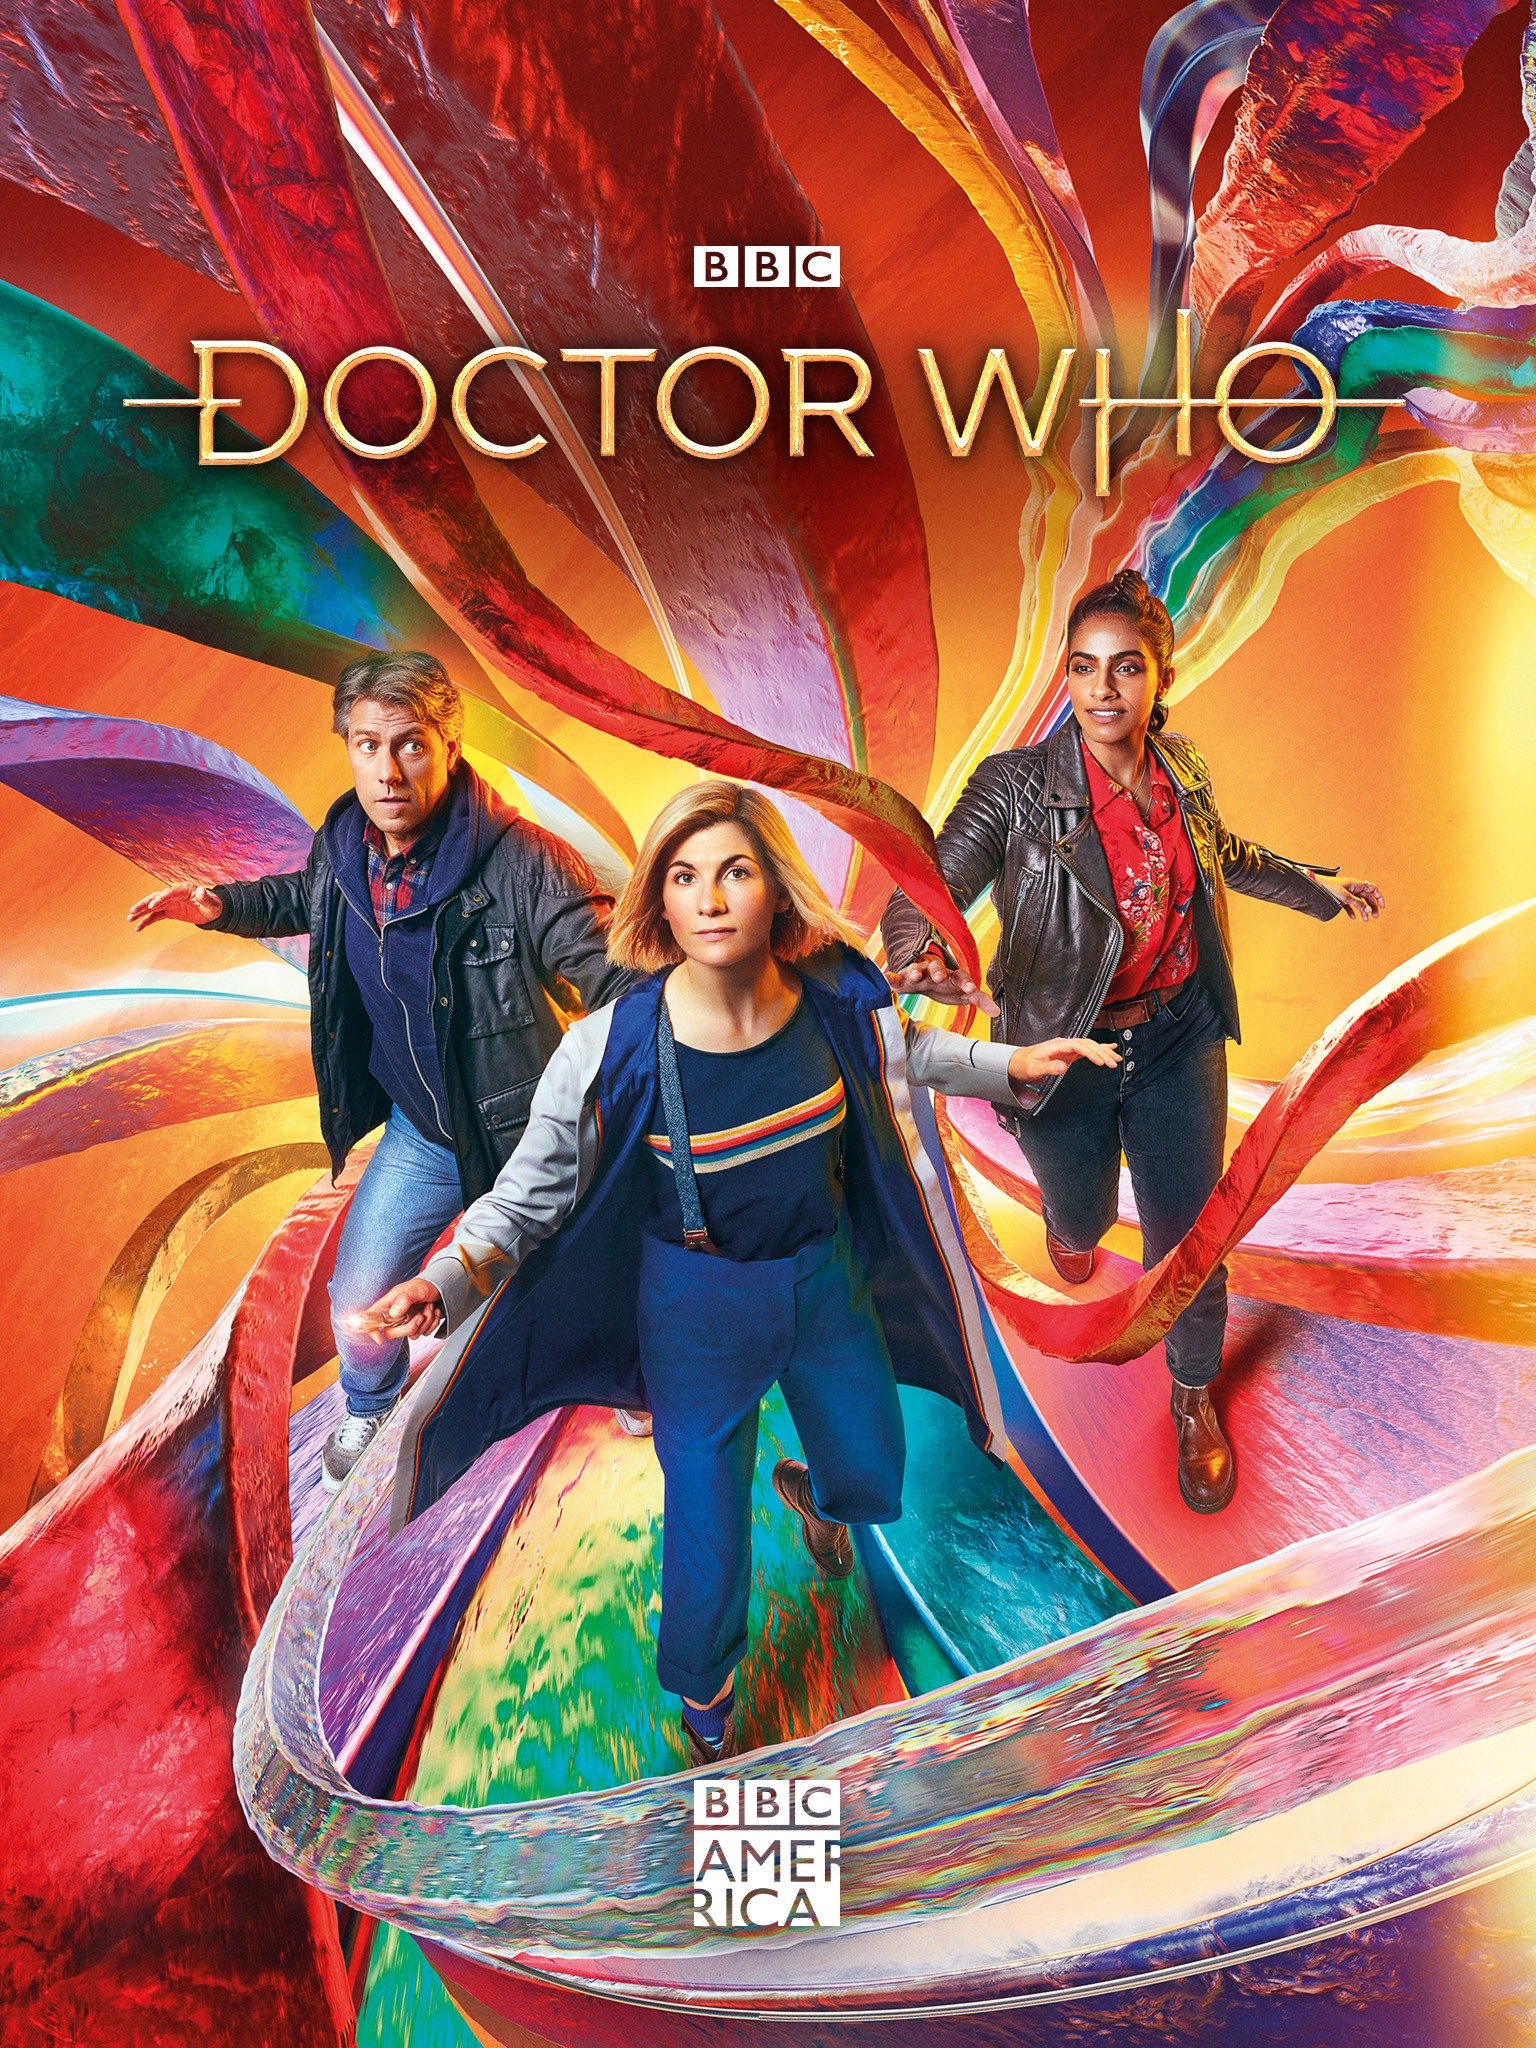 The Ultimate Doctor Who Companion: A Fan's Guide To The Beloved Series